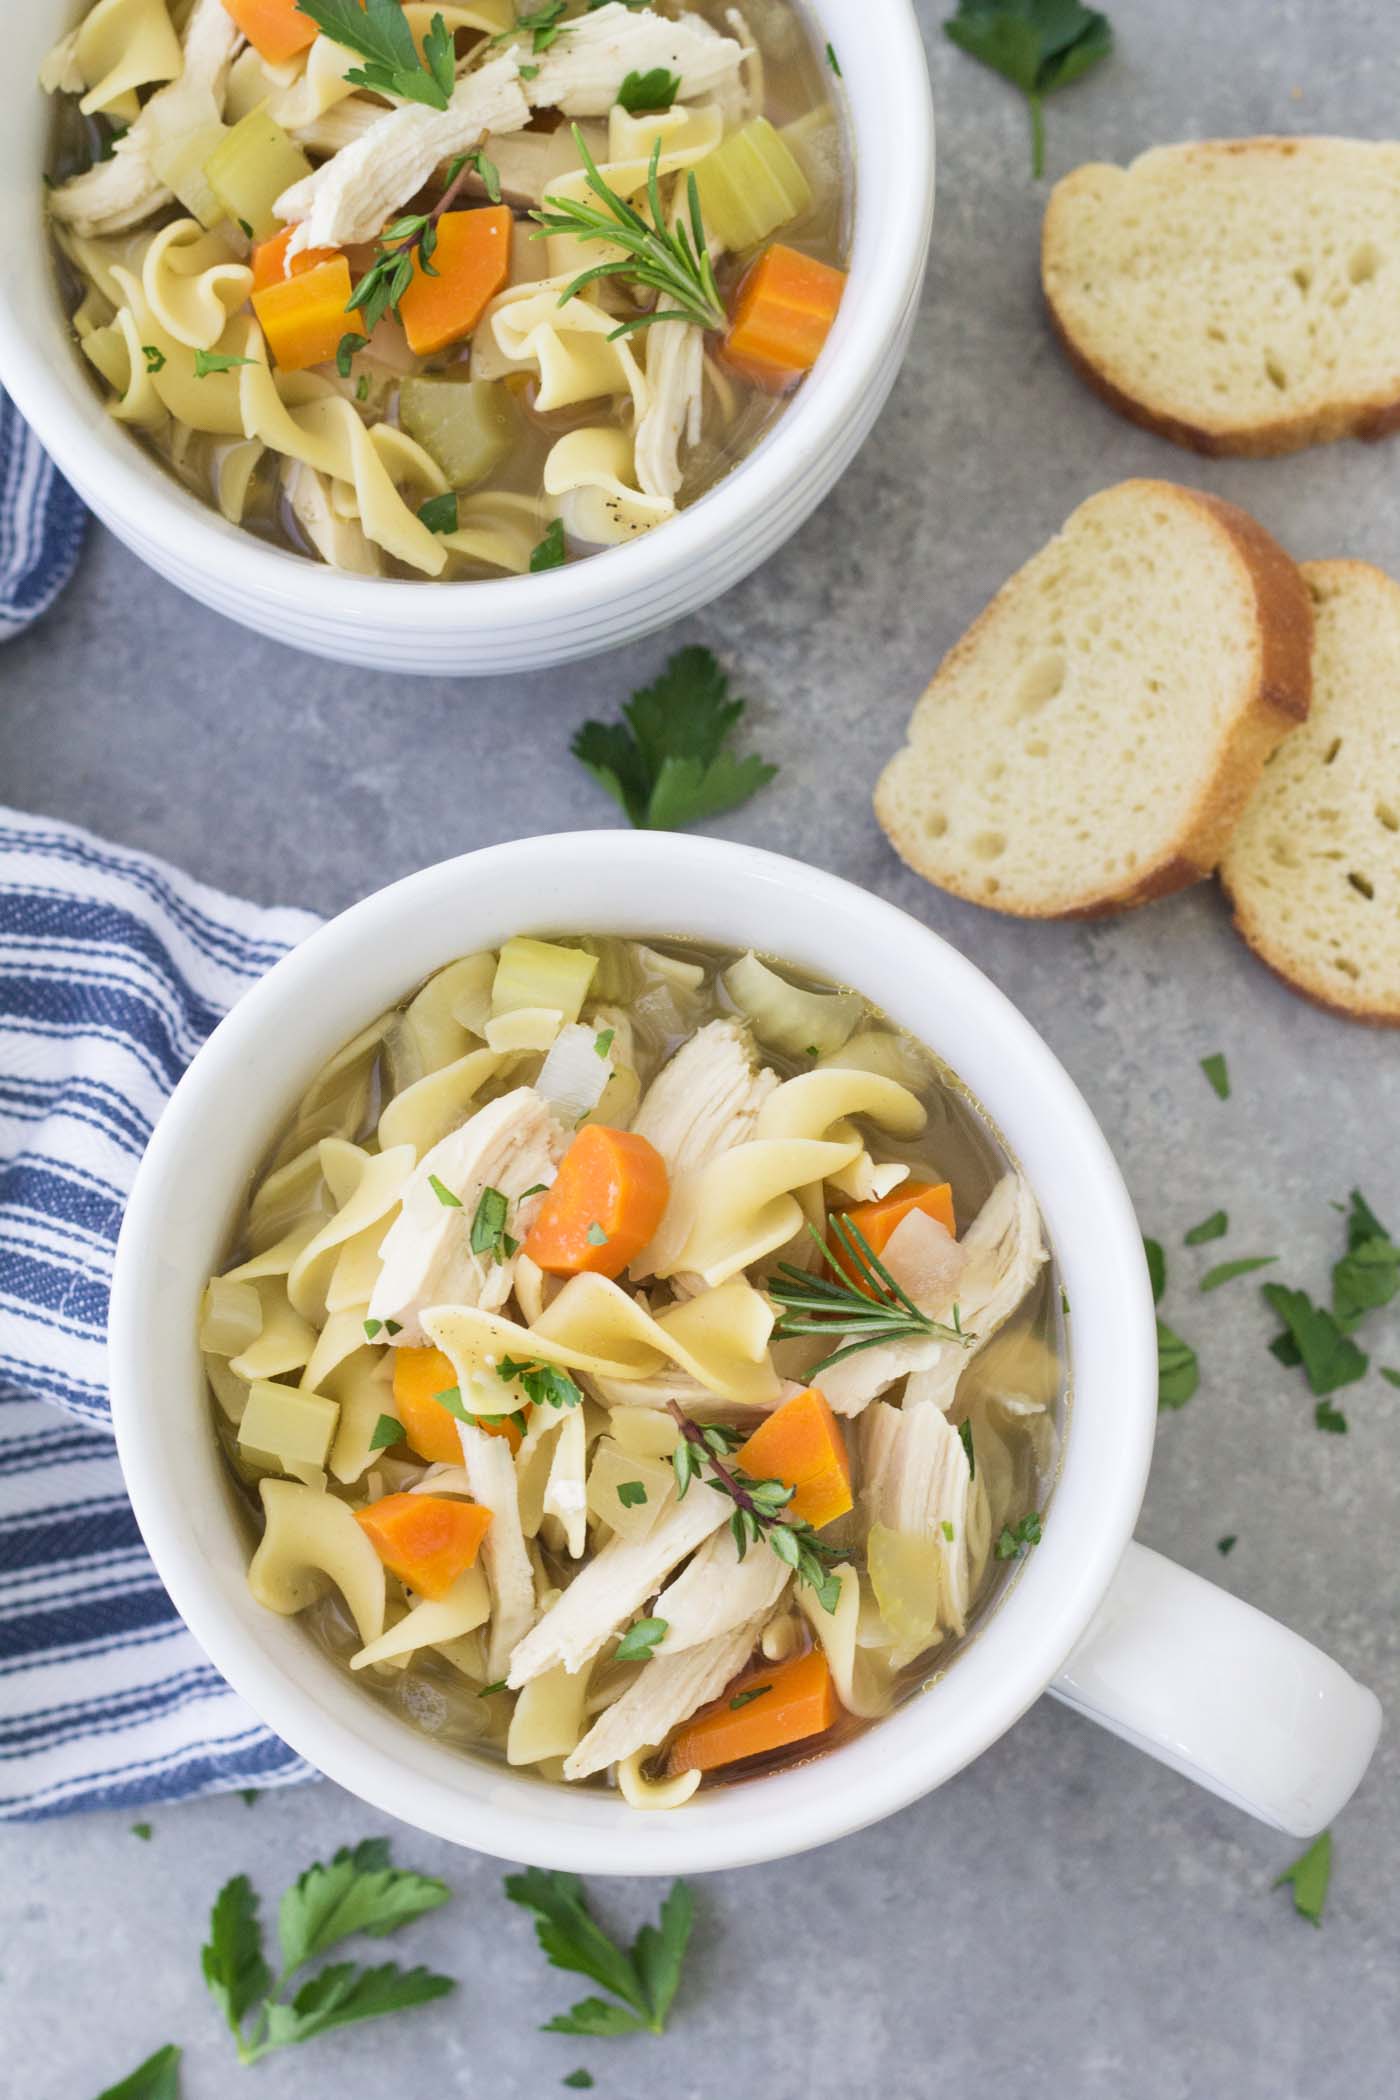 Crock pot chicken noodle soup served in two soup bowls with sliced bread on the side.